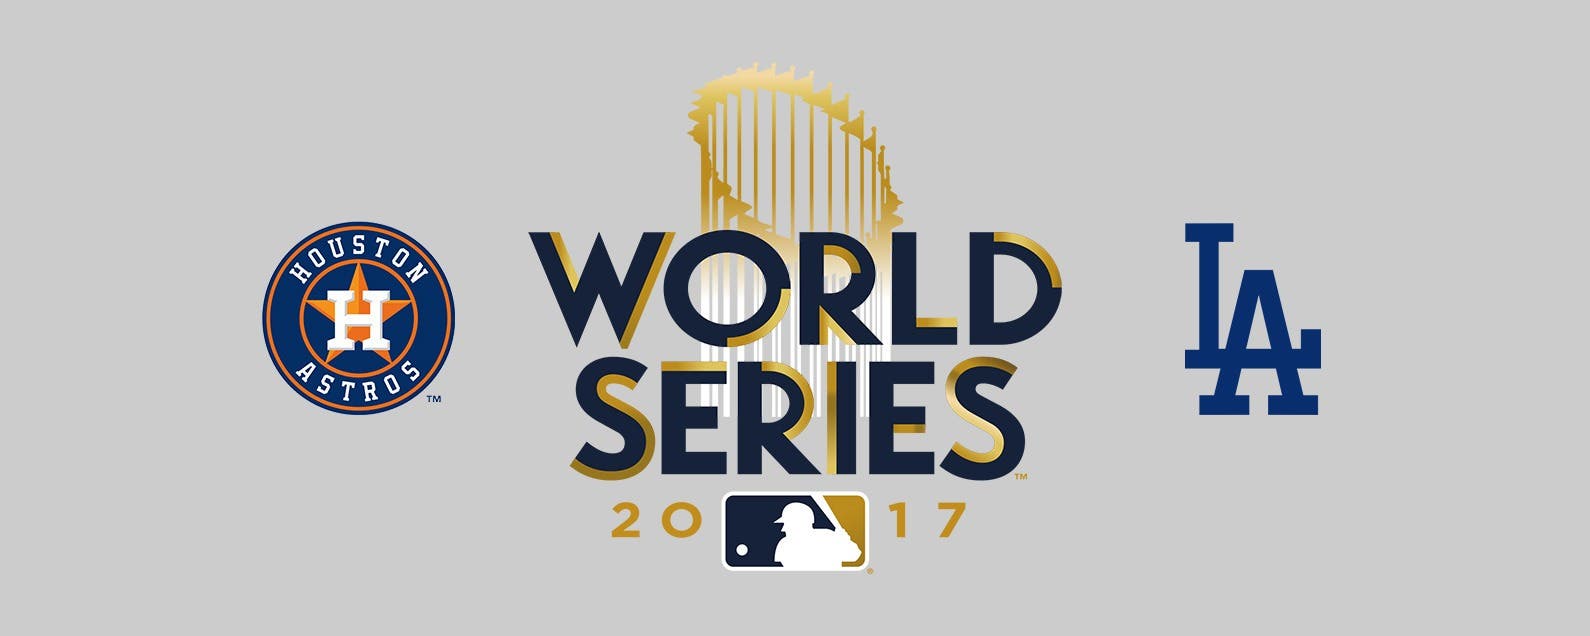 world series how to watch online